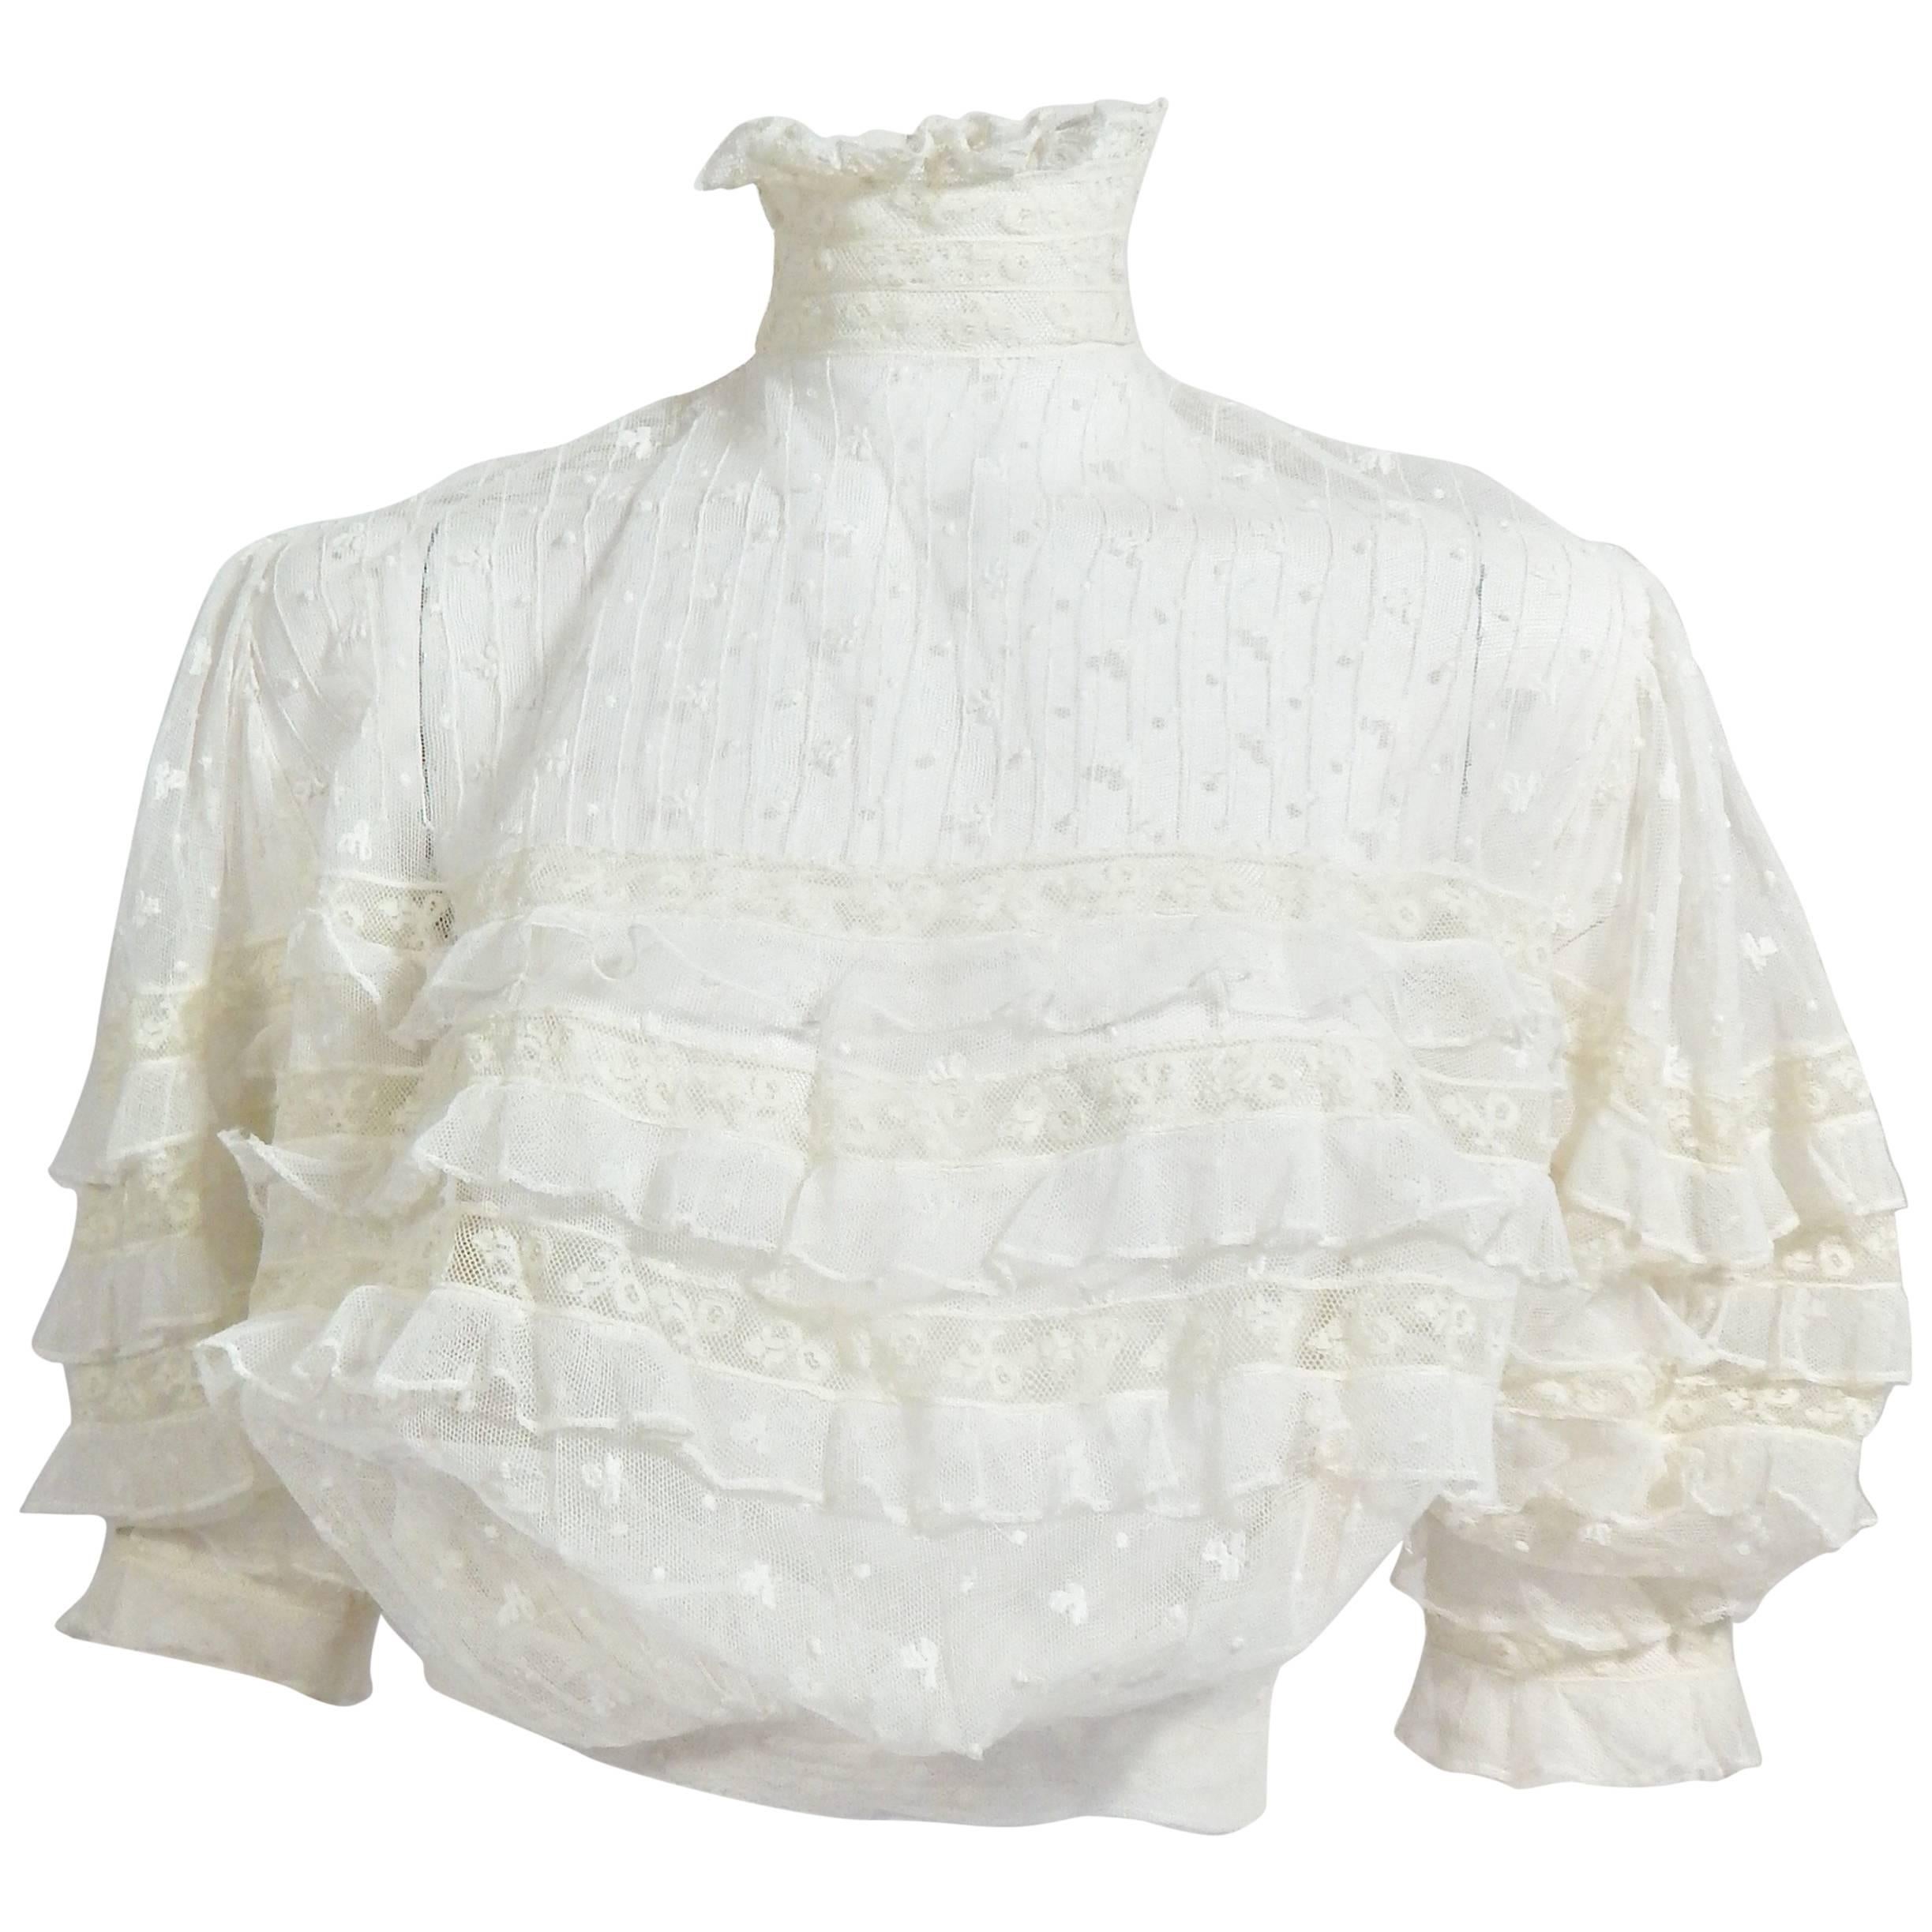 Edwardian Sheer Embroidered Blouse Top